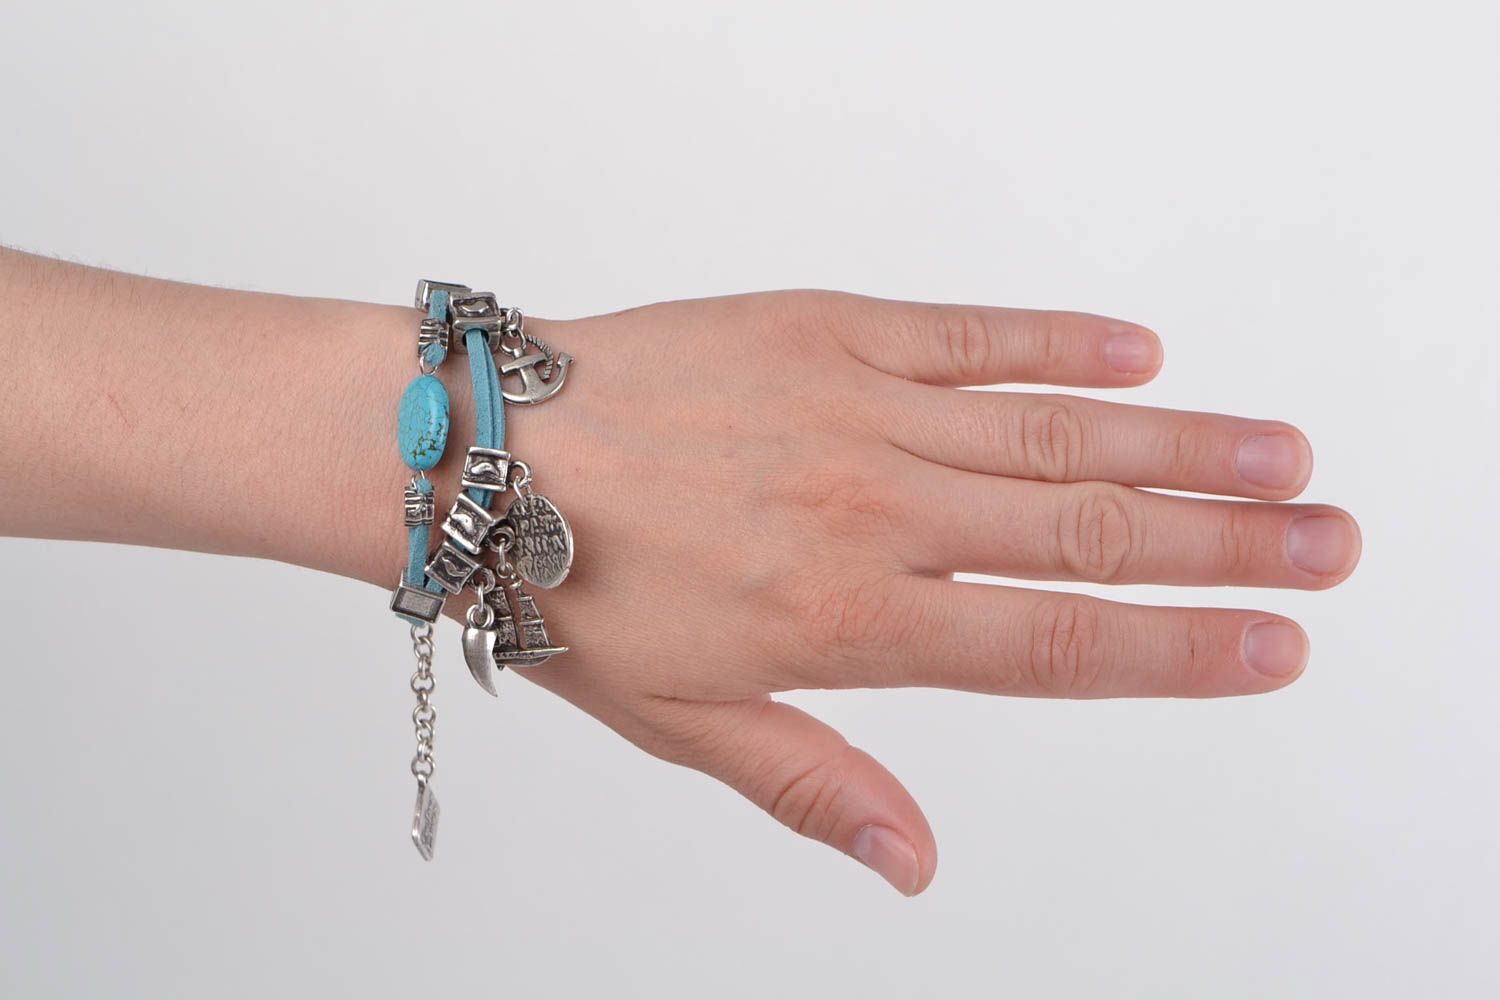 Handmade leather cord wrist bracelet with metal charms and turquoise for women photo 1